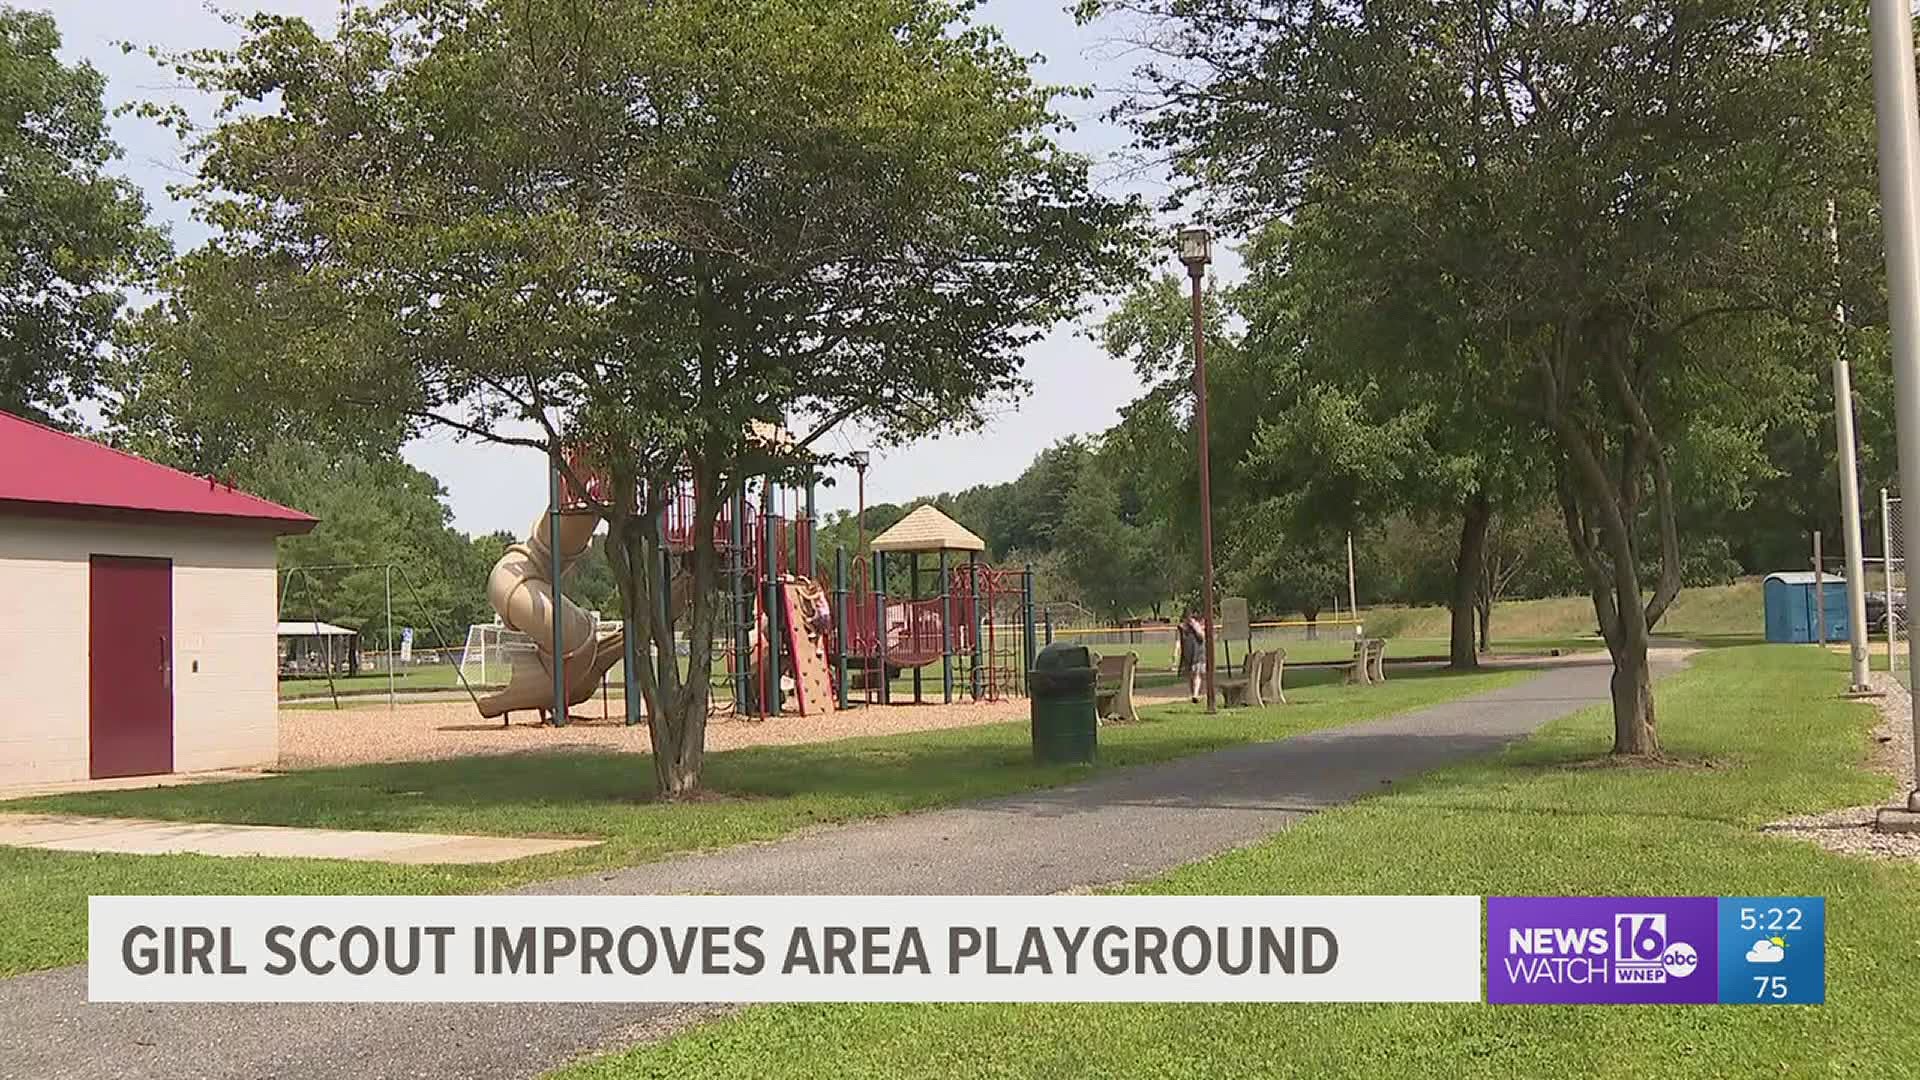 There are some new additions to a playground near Williamsport and it's all thanks to a Girl Scout.